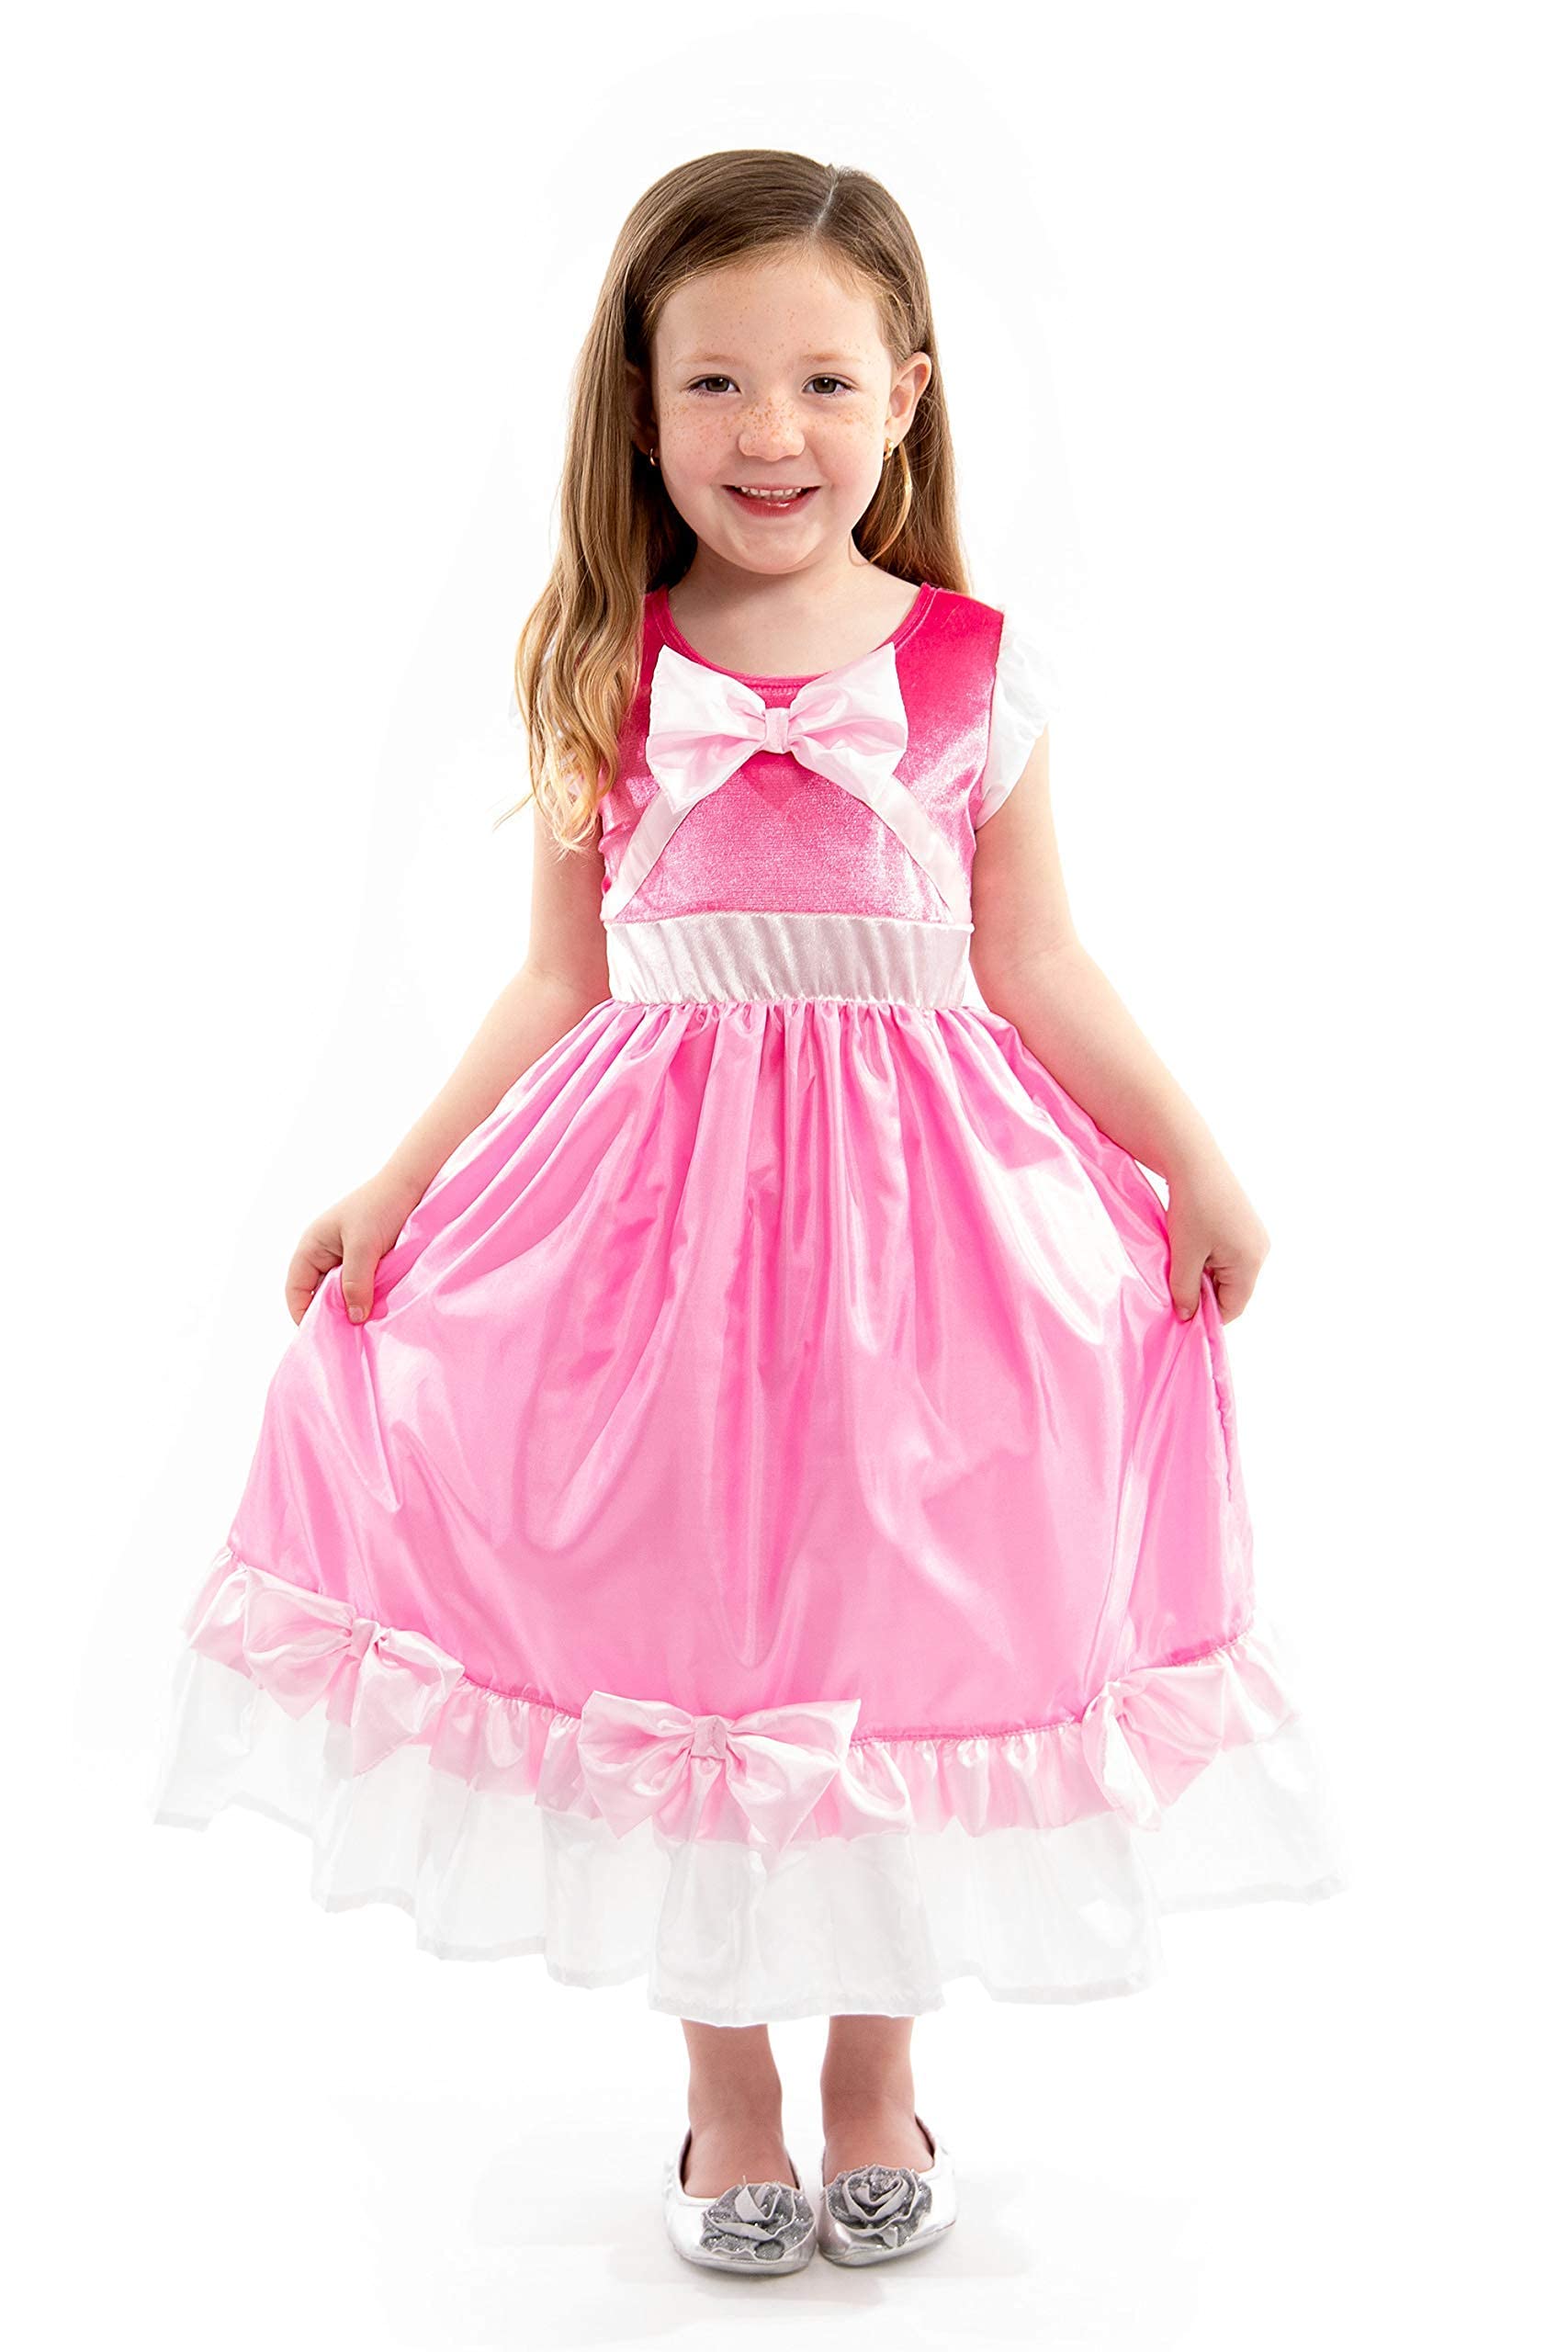 Little Adventures Cinderella Pink Ball Gown Dress up Costume (X-Large Age 7-9) with Matching Doll Dress - Machine Washable Child Pretend Play and Party Dress with No Glitter